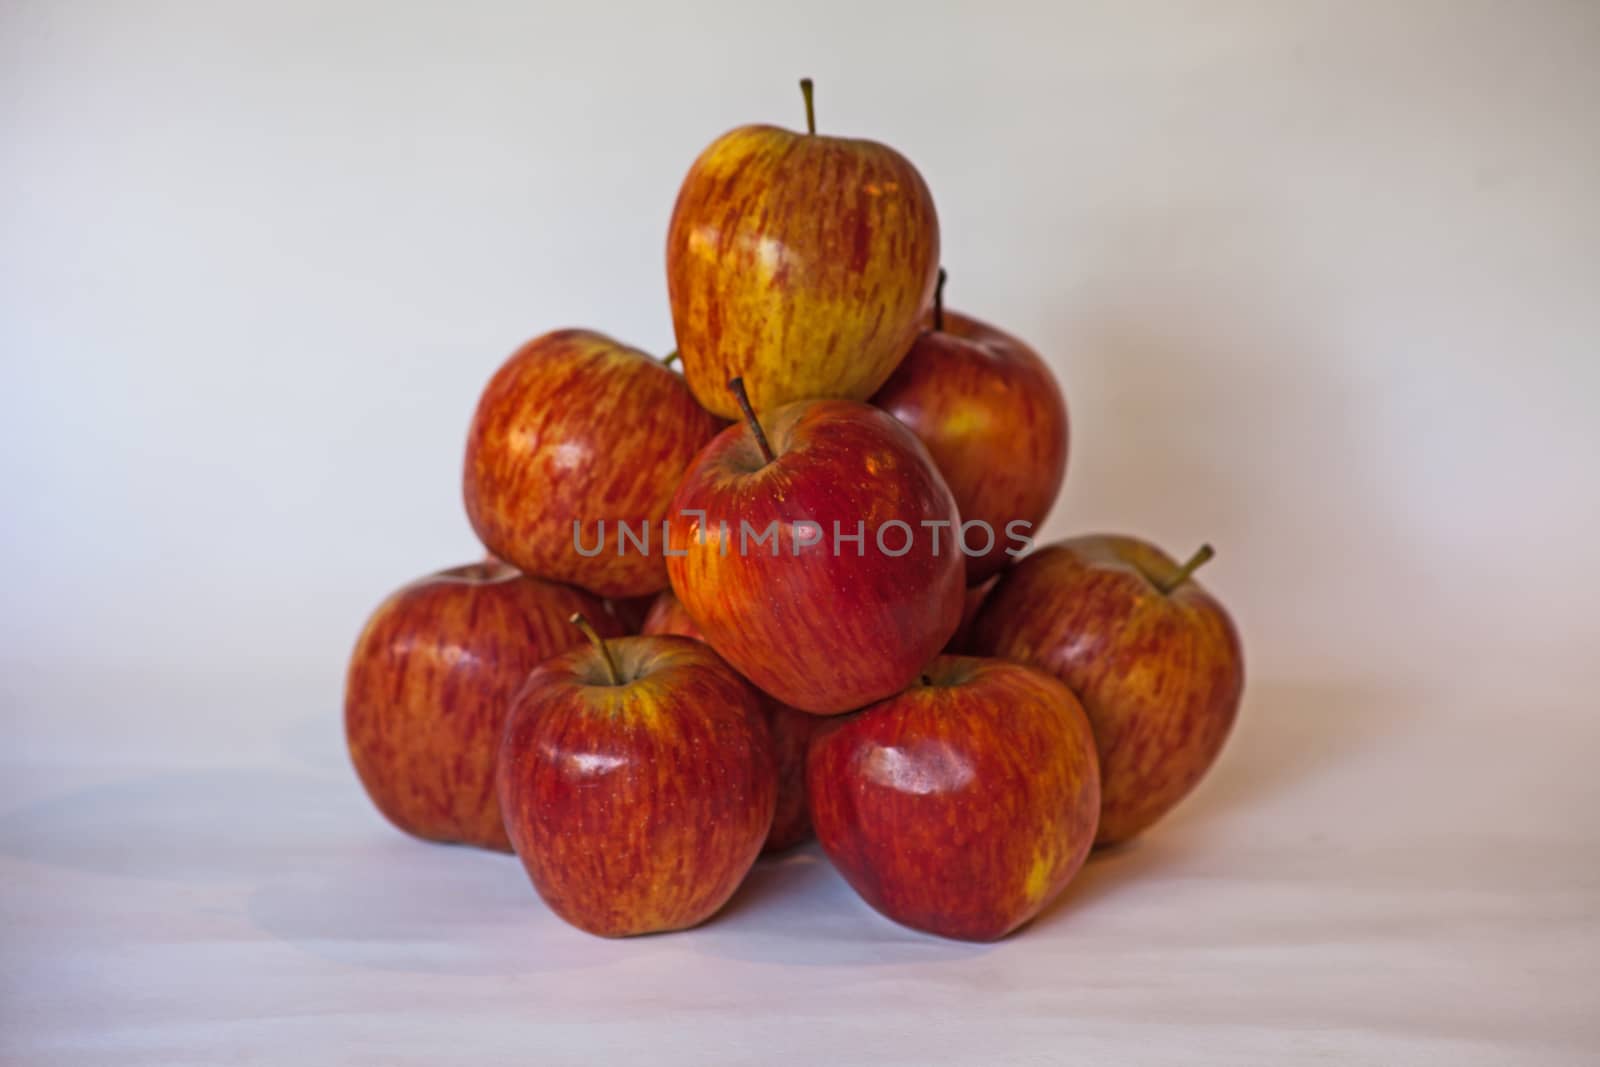 Stacked Red Apples by kobus_peche